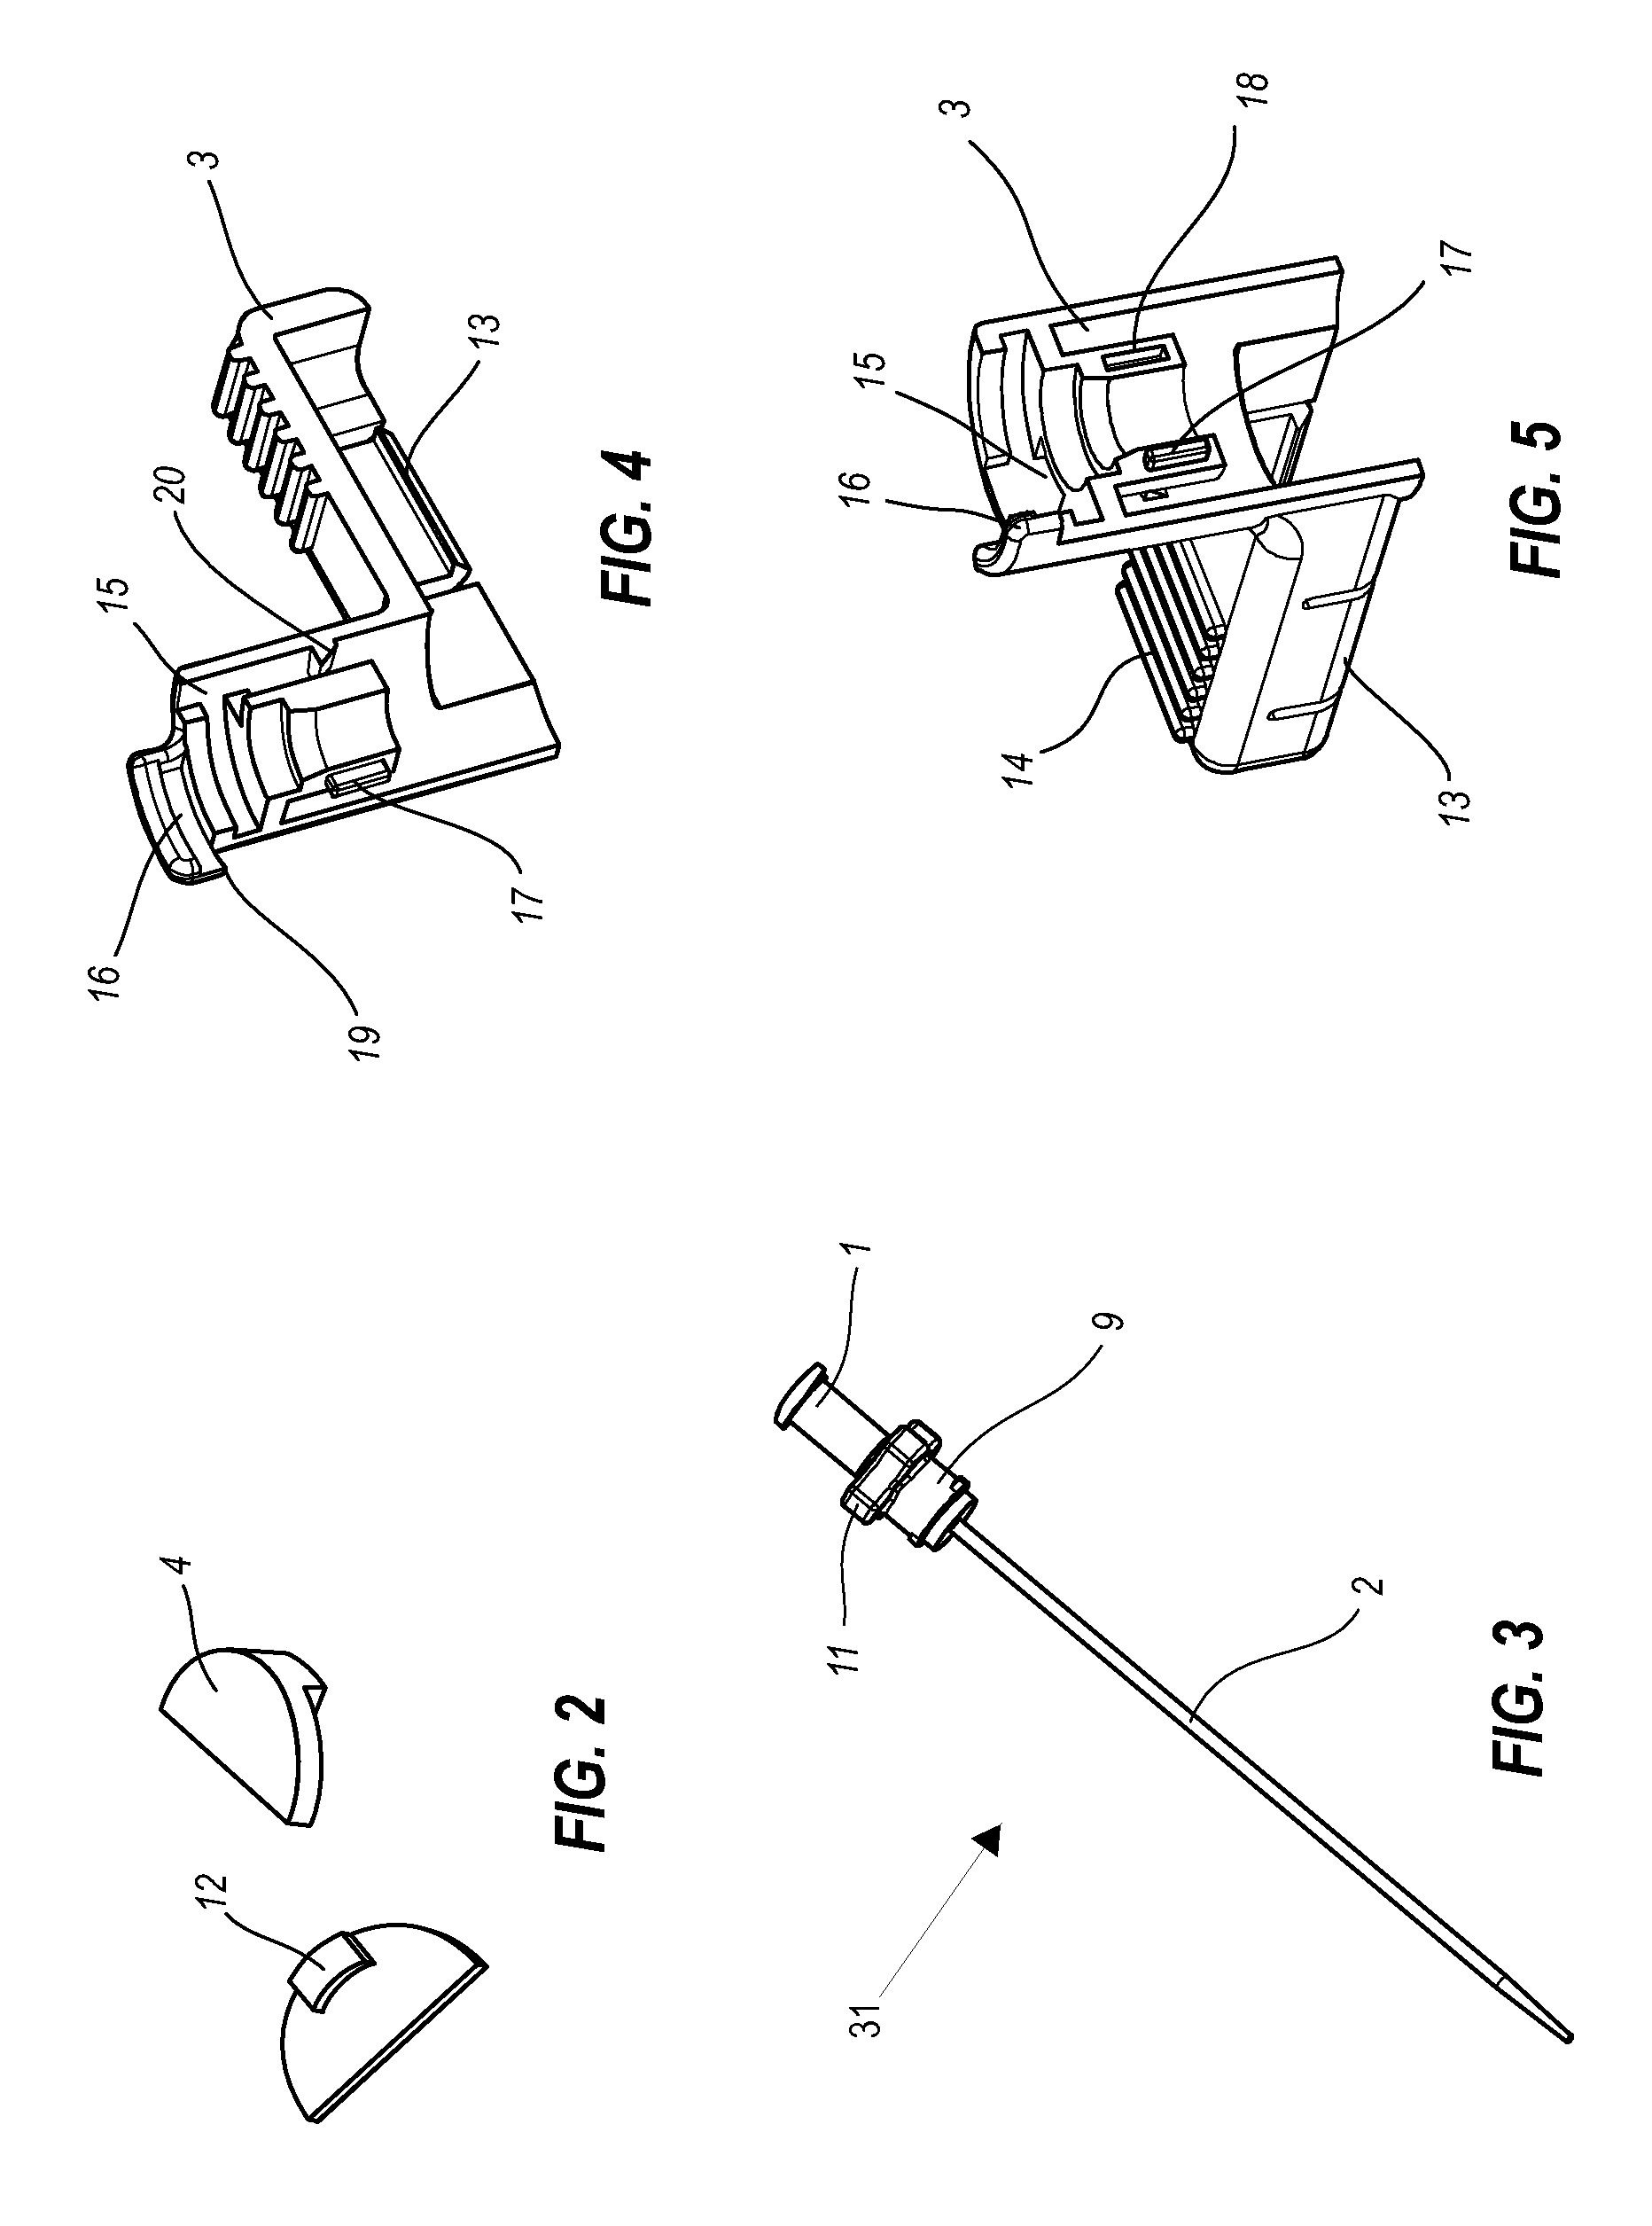 Catheter introducer including a valve and valve actuator